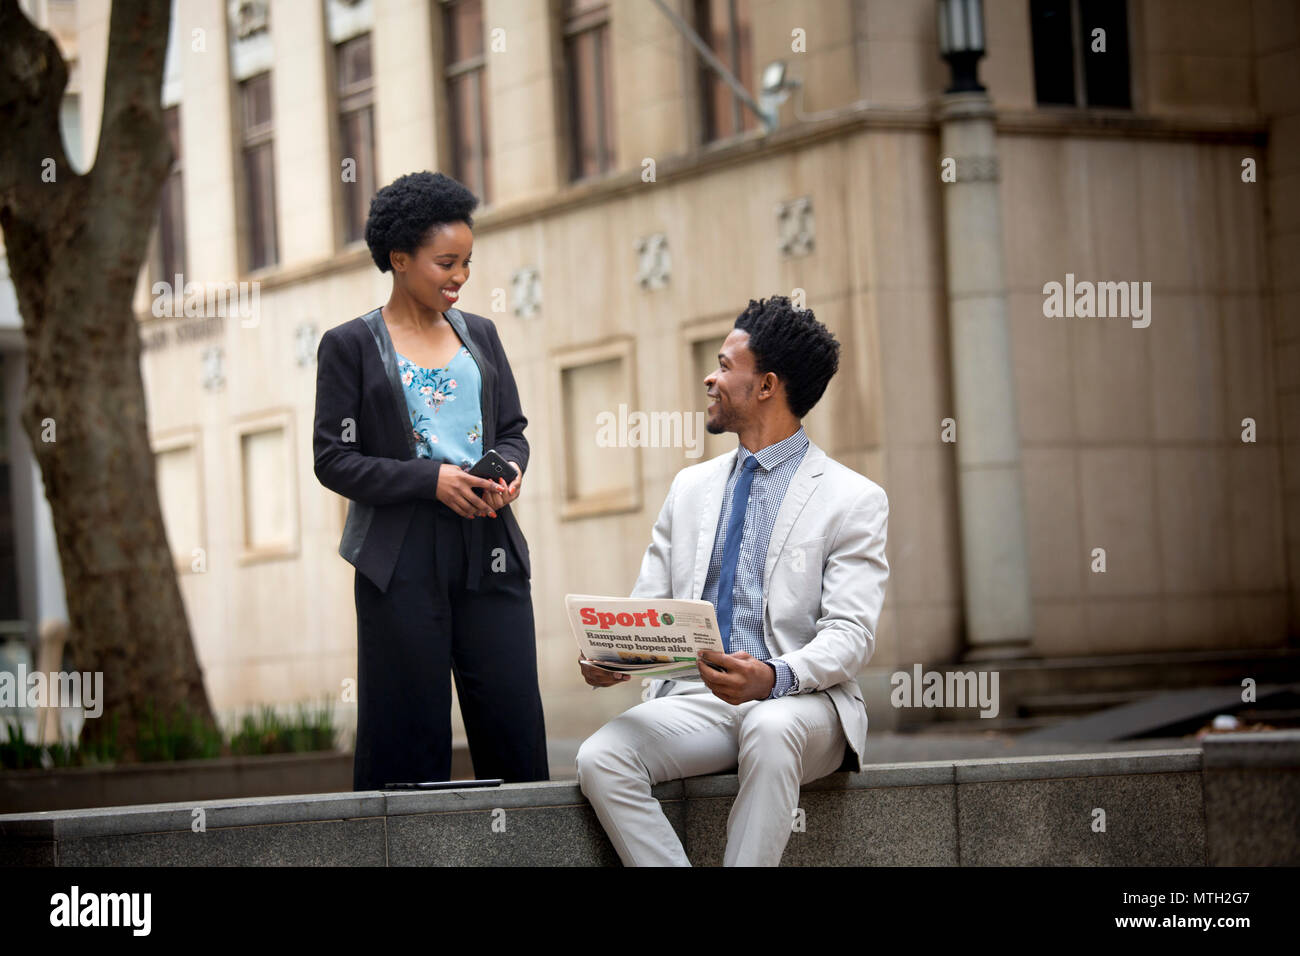 Business man and woman greeting each other Stock Photo